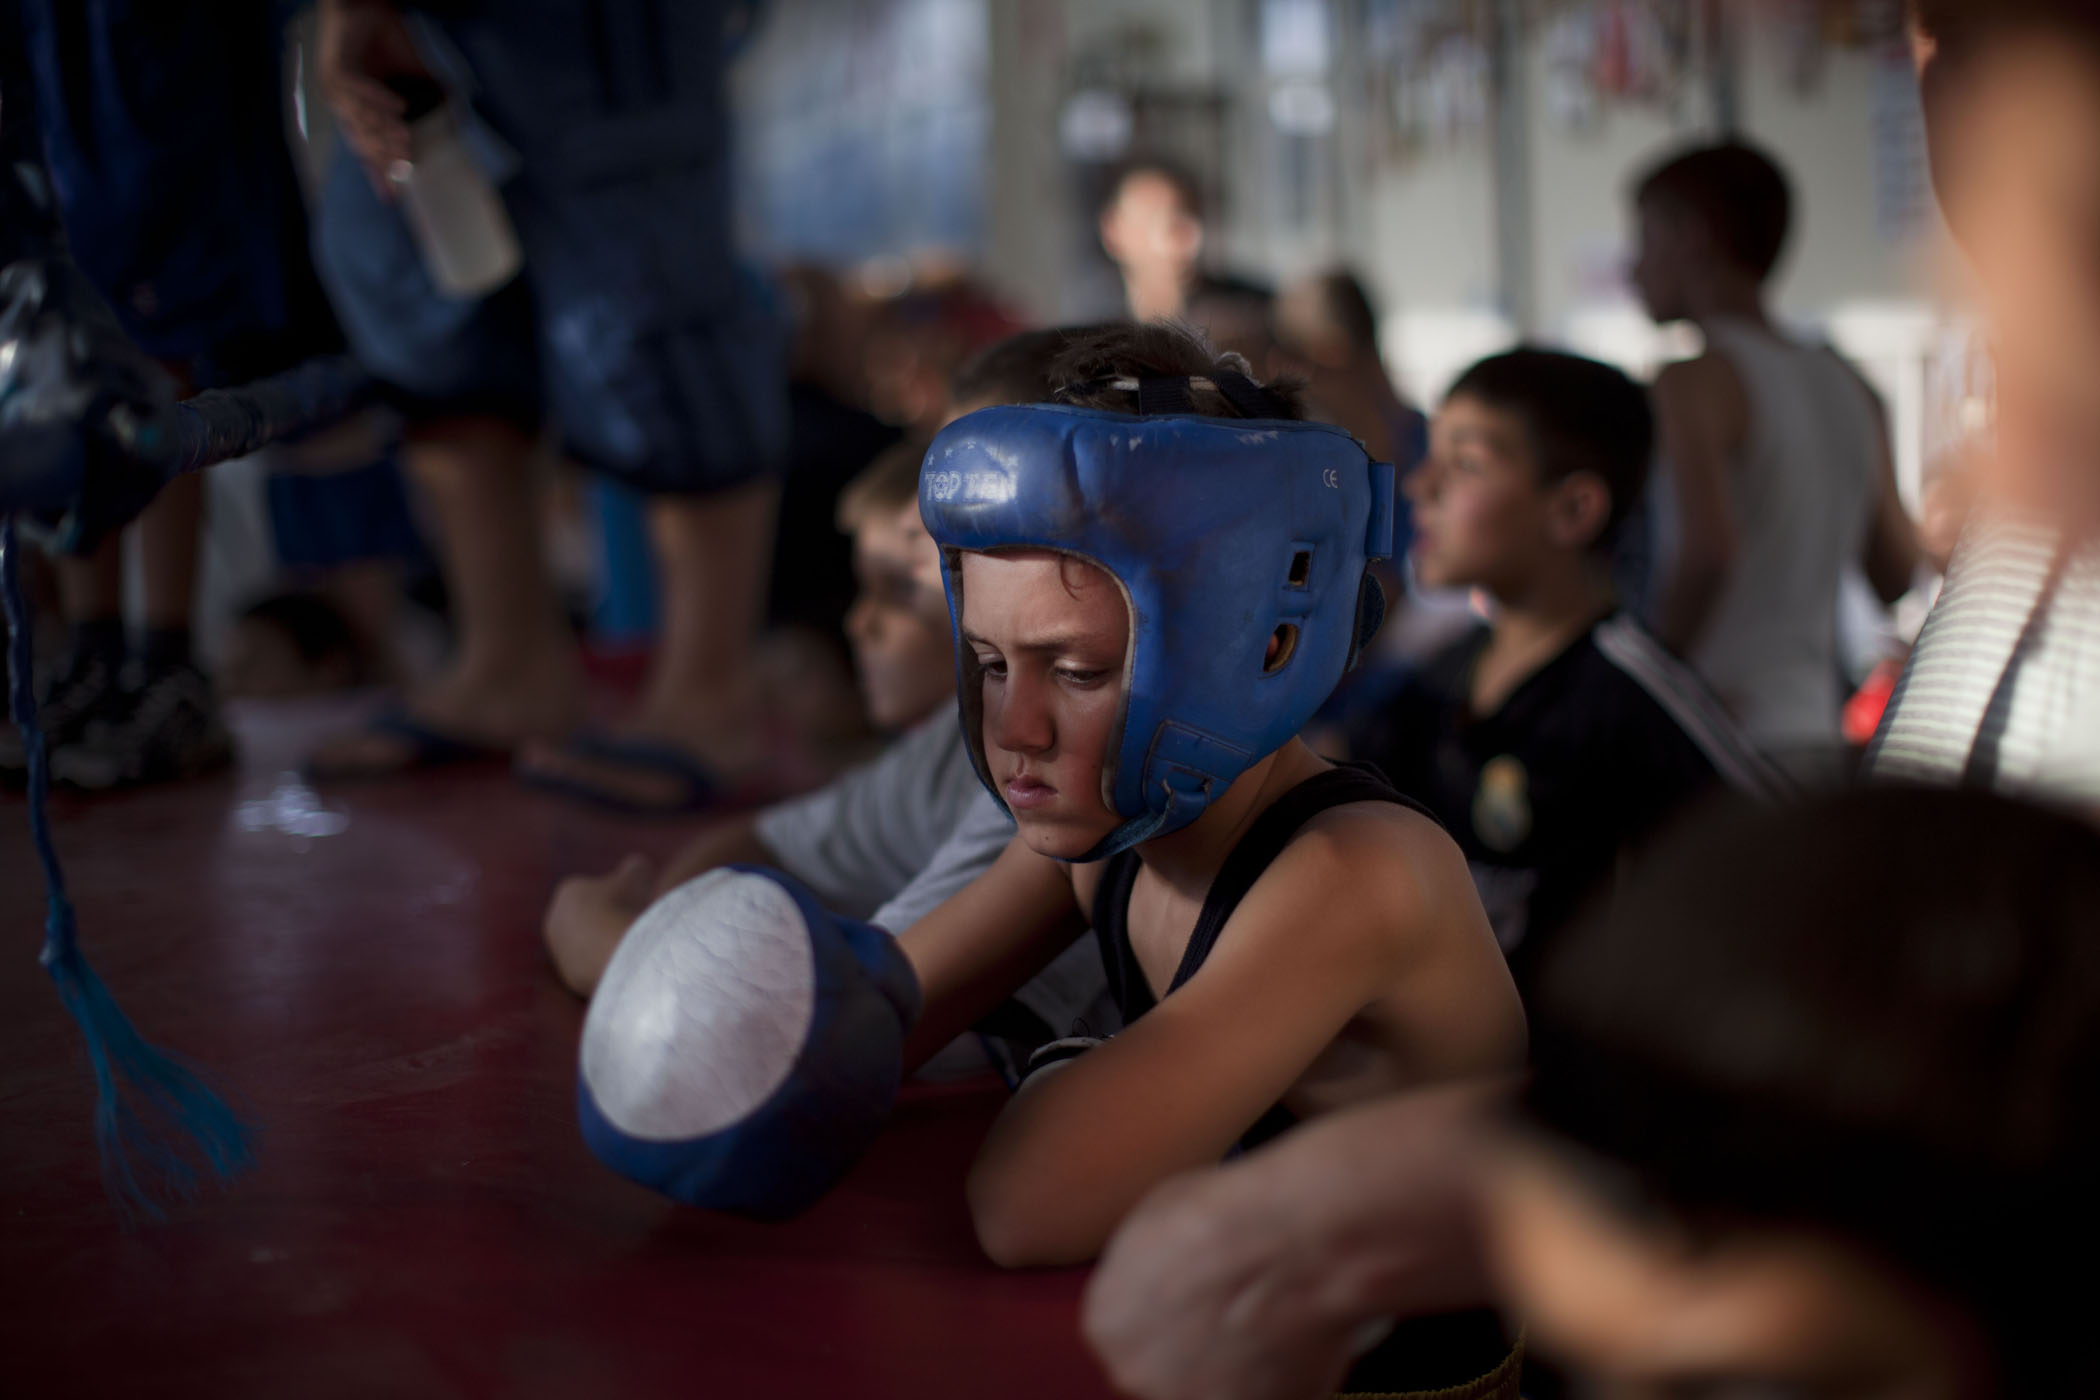 A young Israeli boxer waits for his fight during Israel's National Youth Boxing Championship in the Arab village of Kfar Yasif, northern Israel.